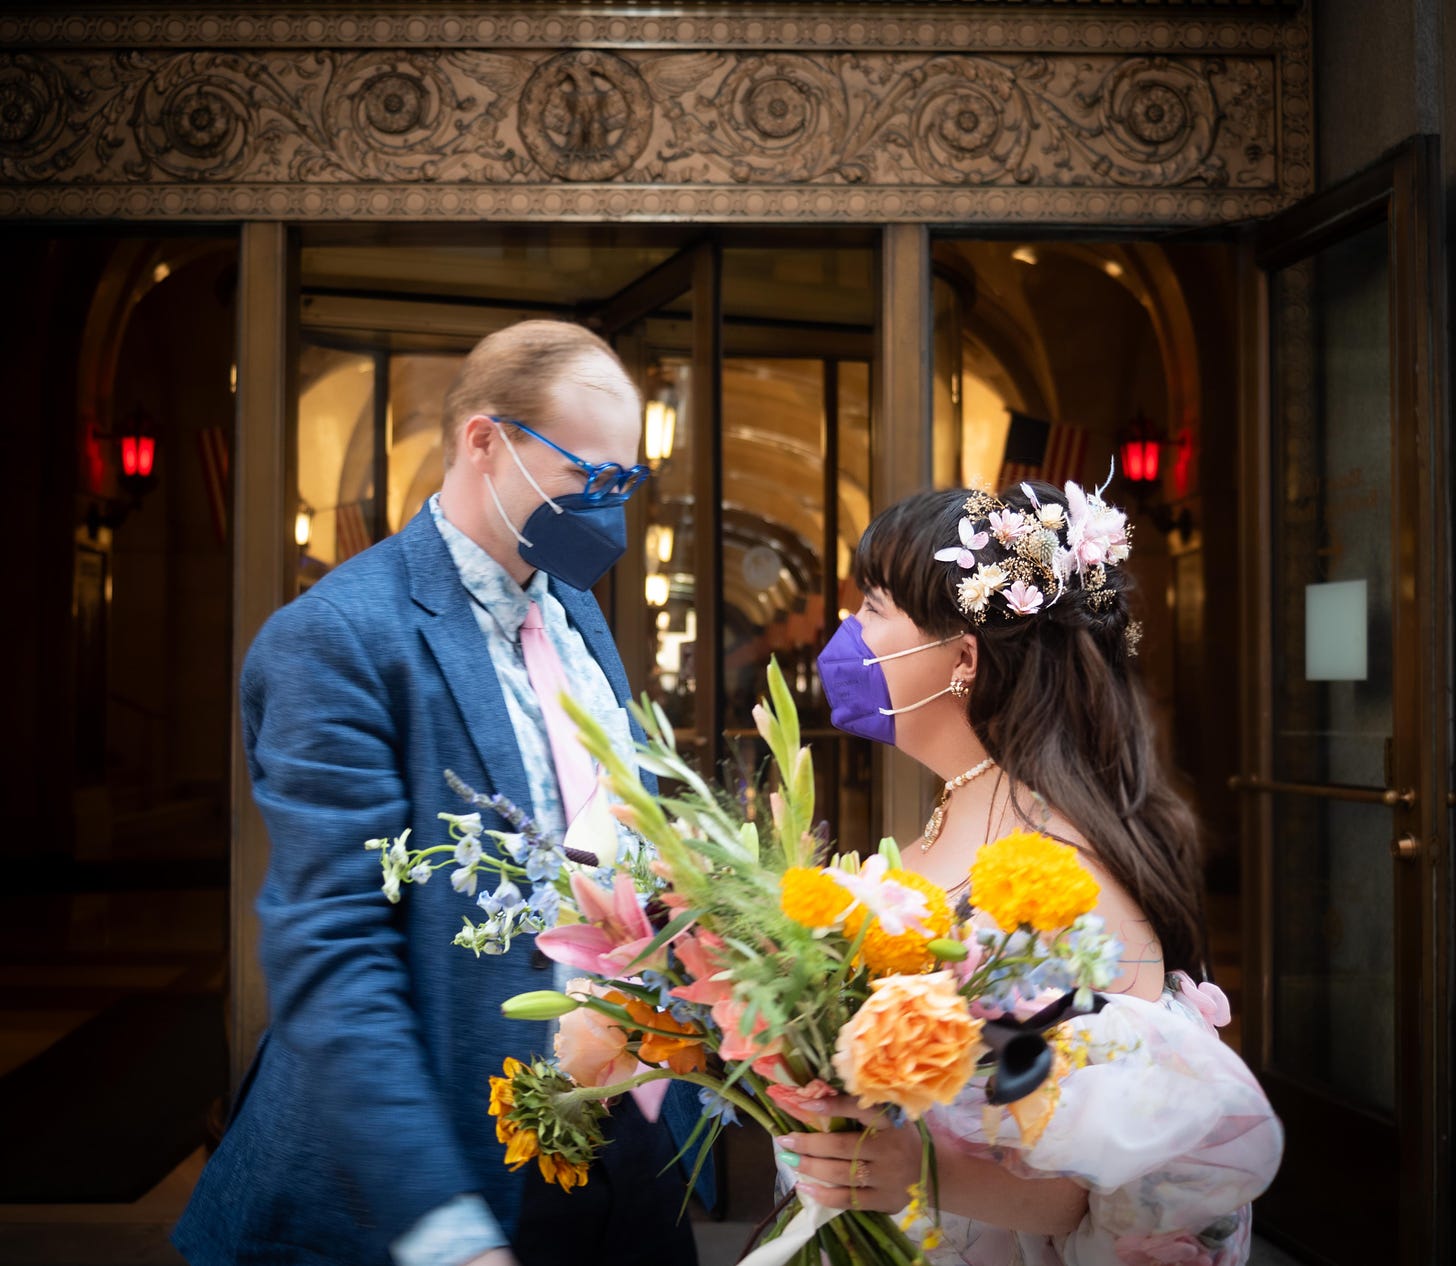 Daniella and her partner Joe stand smiling at each other behind face masks outside of Chicago's city hall, wearing their wedding garb.